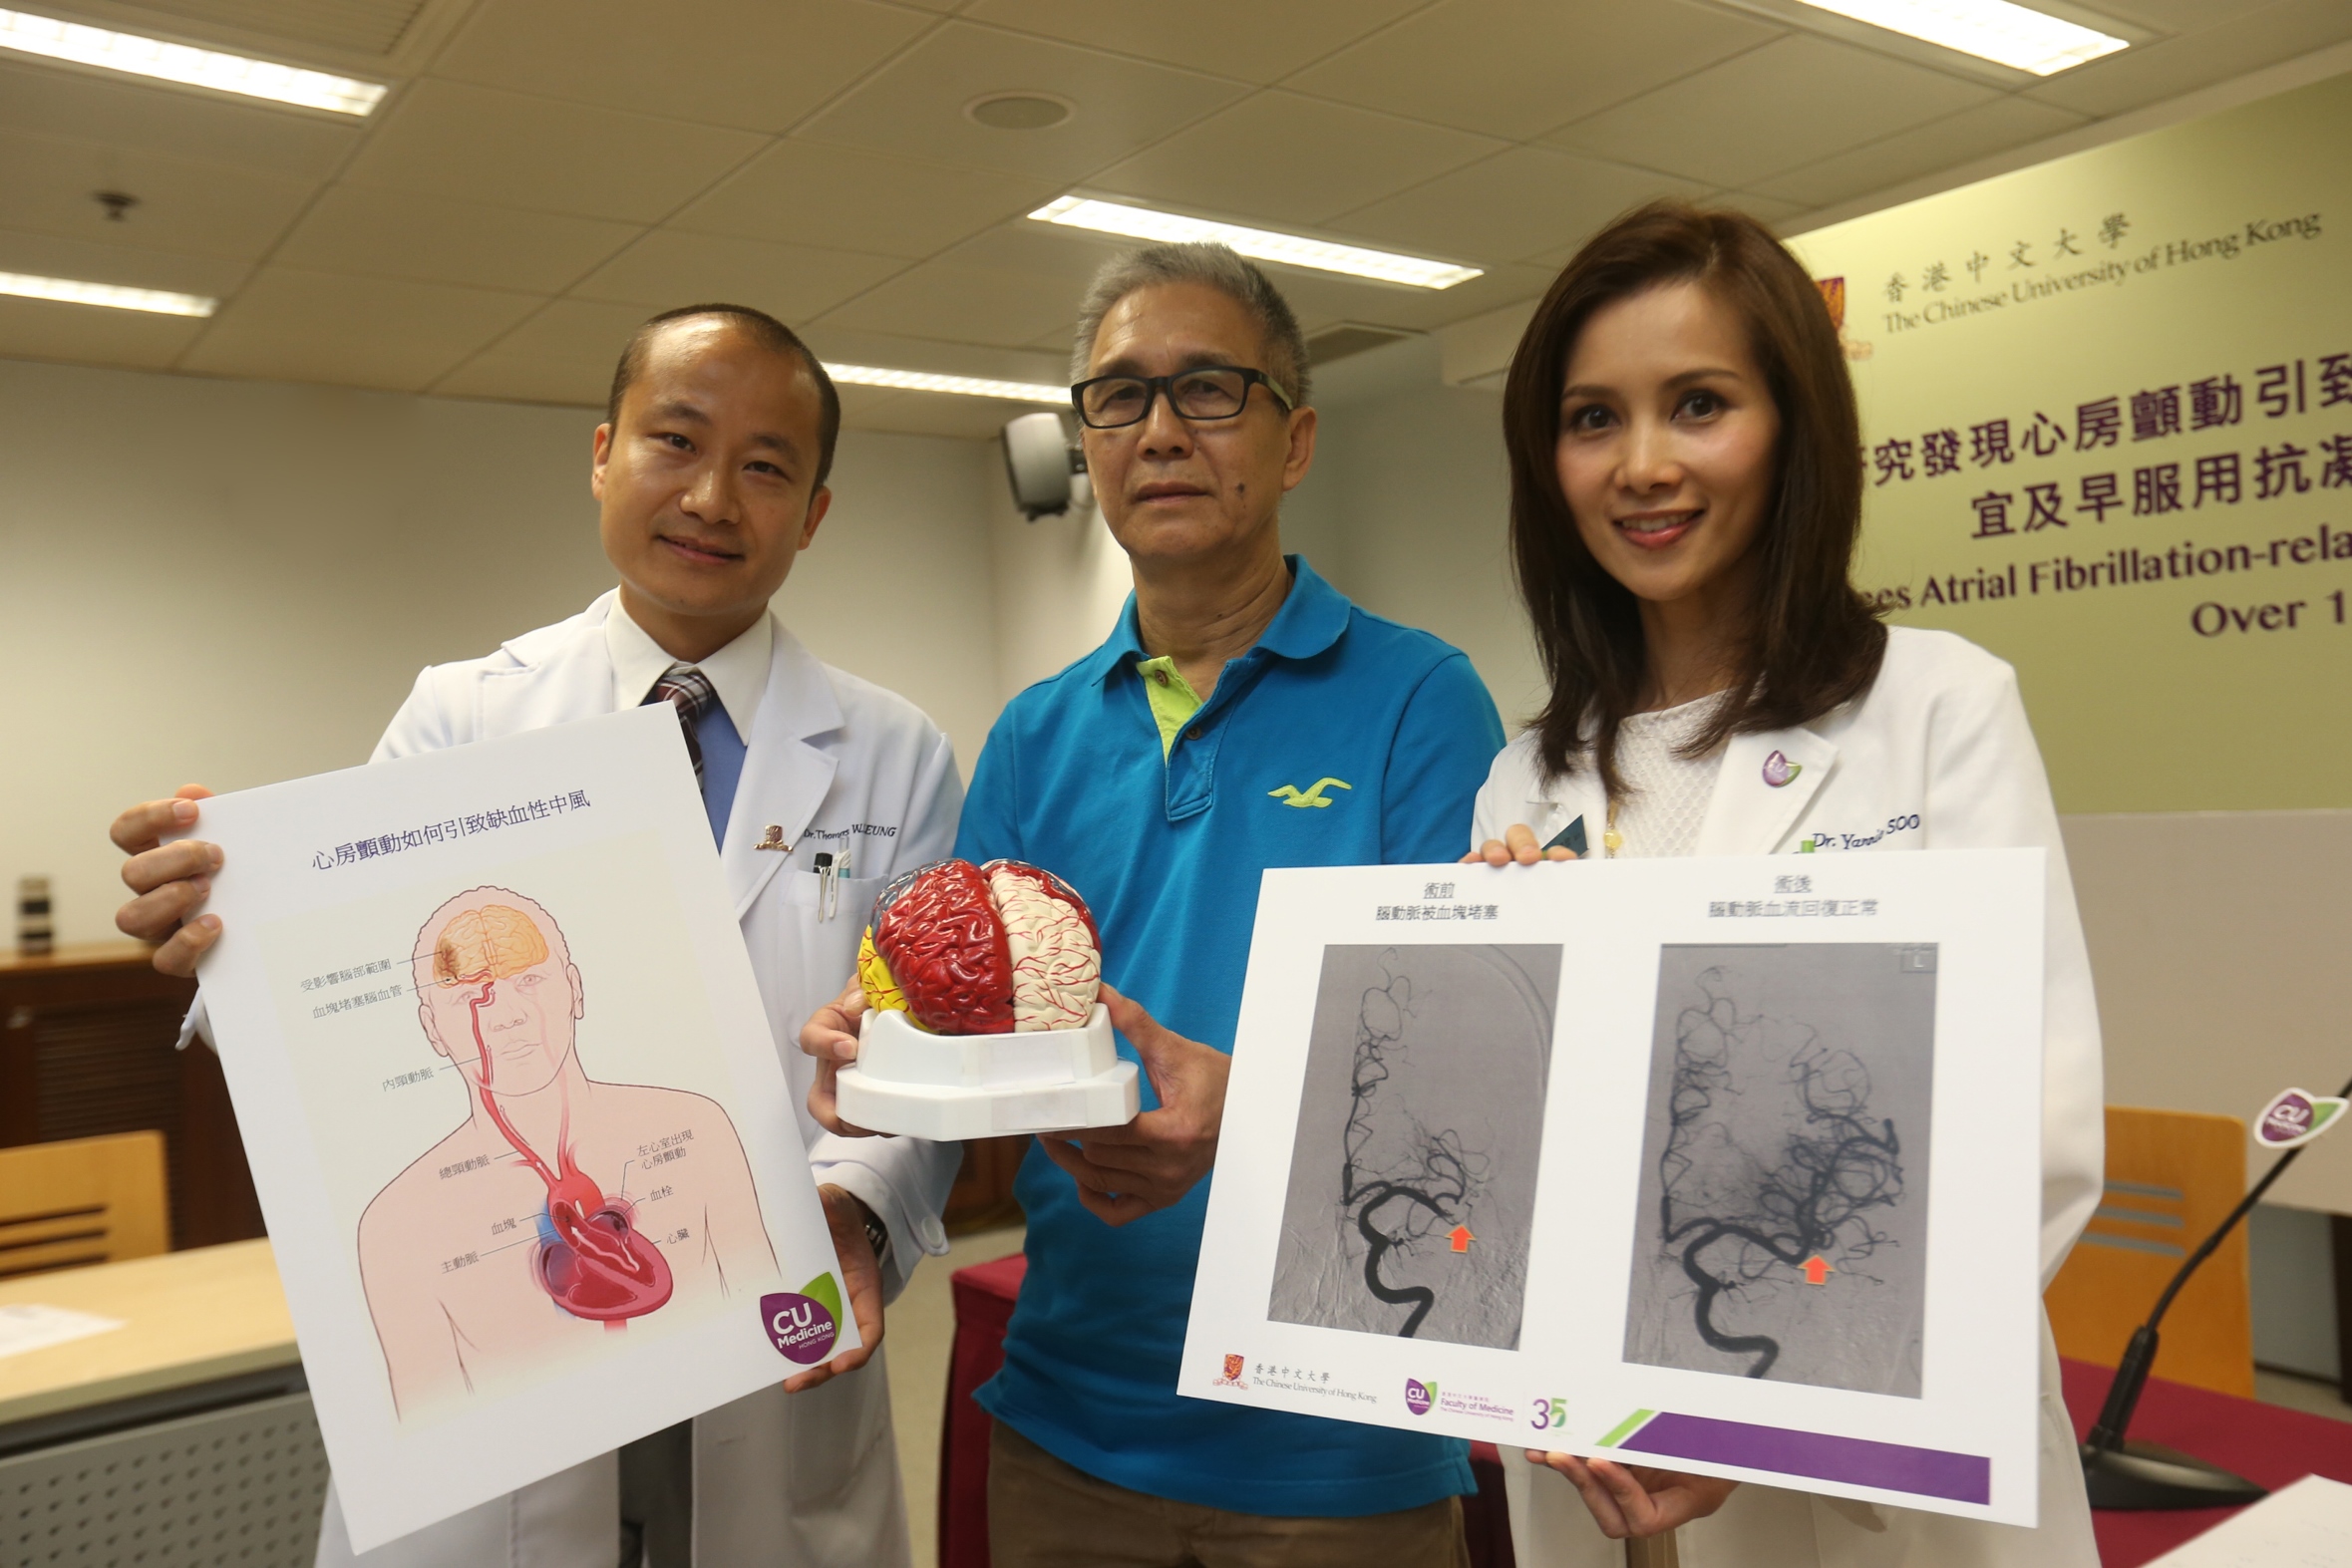 A research conducted by the neurology team from the Faculty of Medicine at The Chinese University of Hong Kong shows that the number of Atrial Fibrillation-related stroke cases has seen 3 times higher over 15 years. (From left) Dr. Thomas LEUNG, Lee Quo Wei Associate Professor of Neurology, Department of Medicine and Therapeutics, Faculty of Medicine at CUHK; Sharing patient Mr LOK; and Dr. Yannie SOO, Clinical Professional Consultant, Division of Neurology, Department of Medicine and Therapeutics, Faculty of Medicine at CUHK.